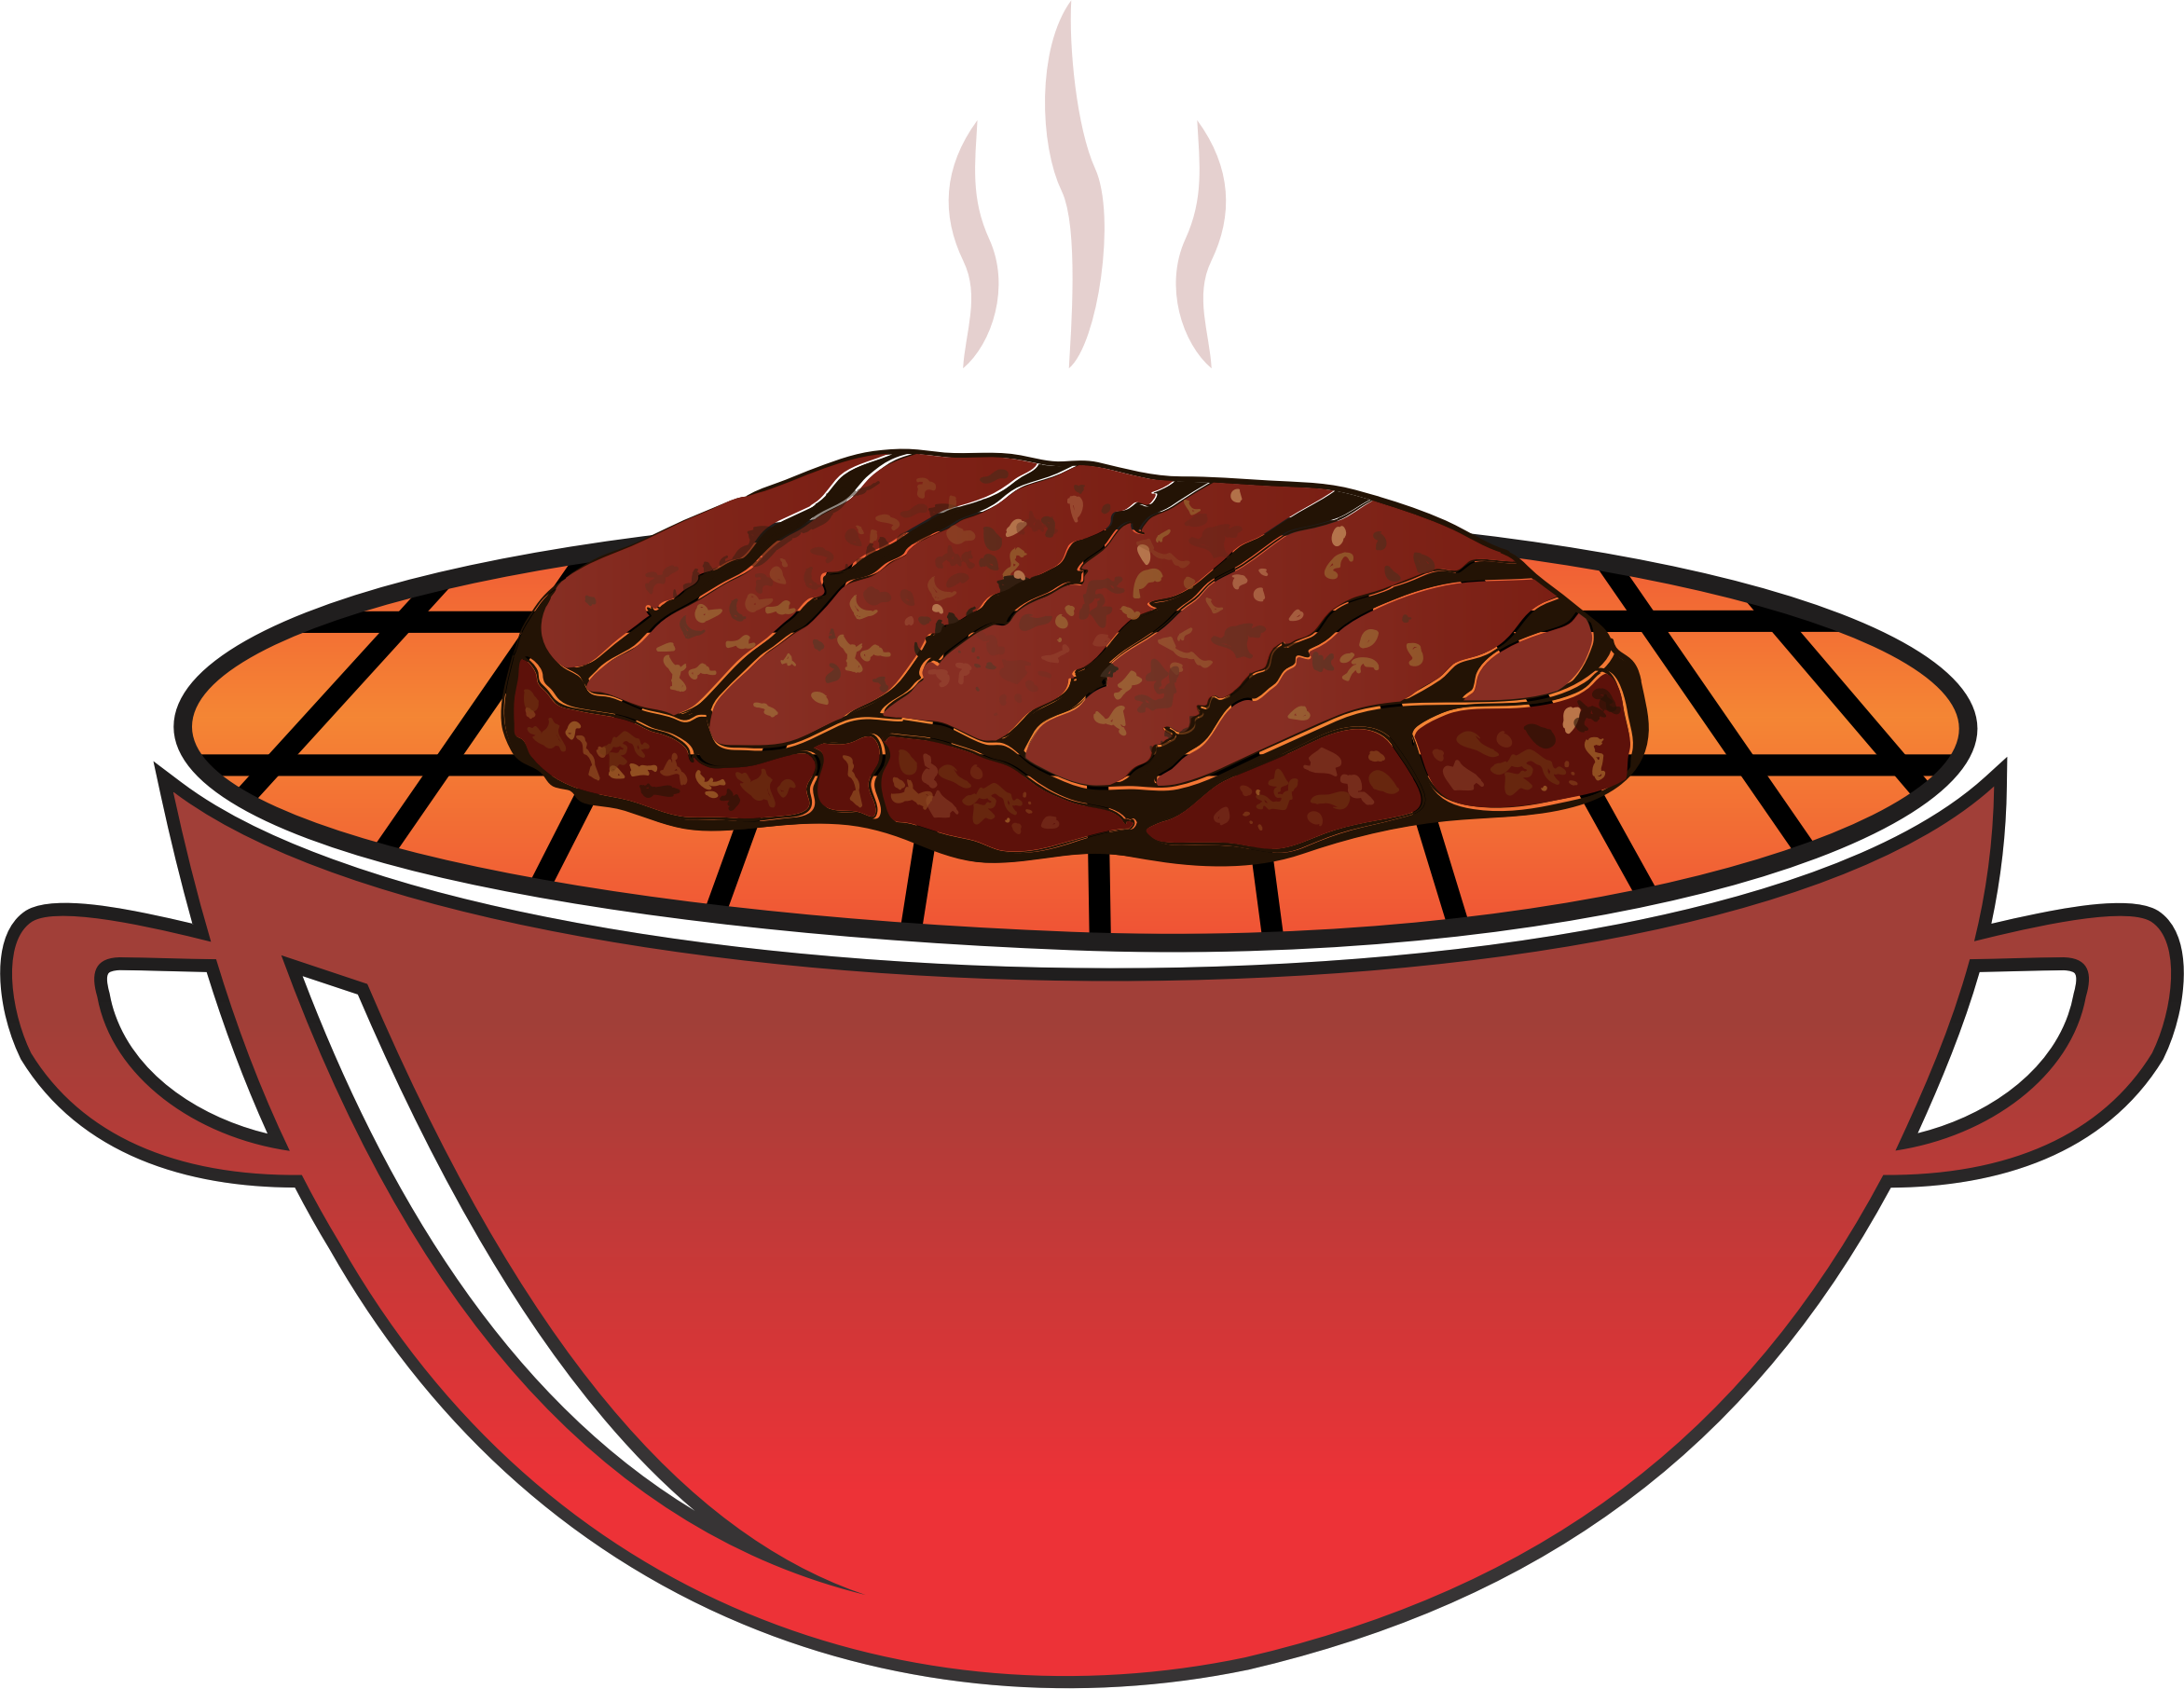 Grilled meats clipart - Clipground